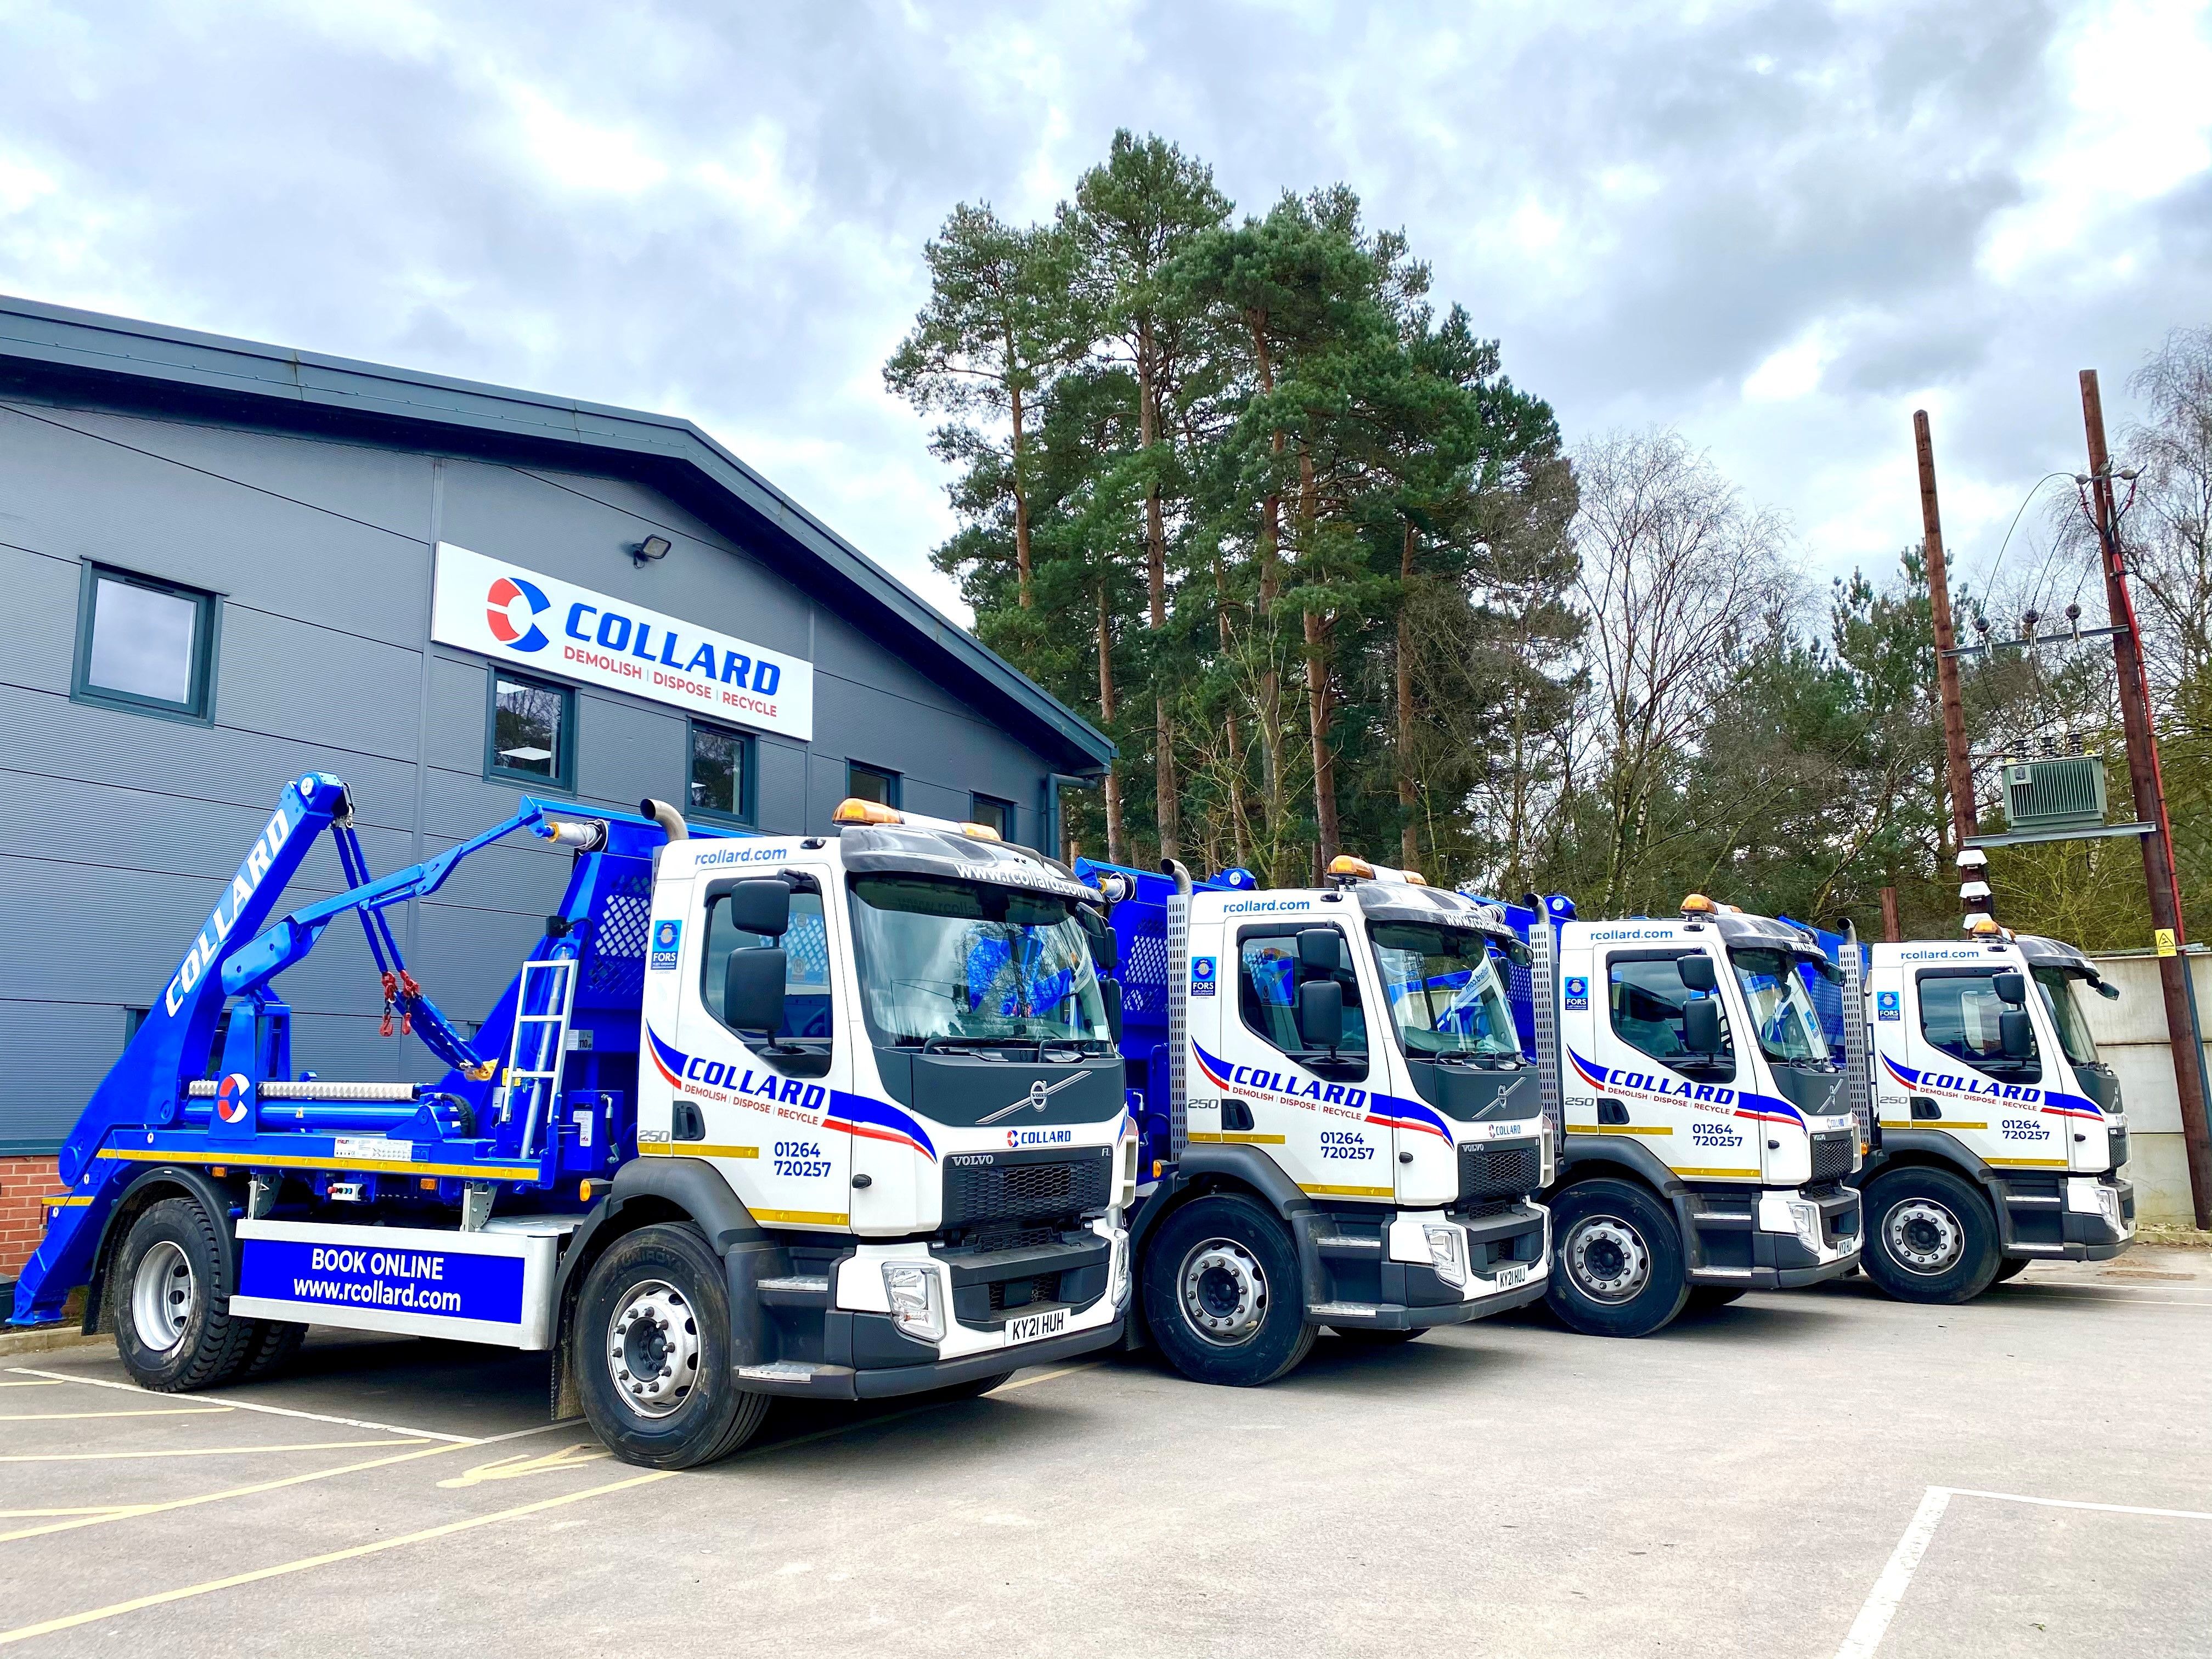 Collard Group invest in new Kiverco waste-recycling plants